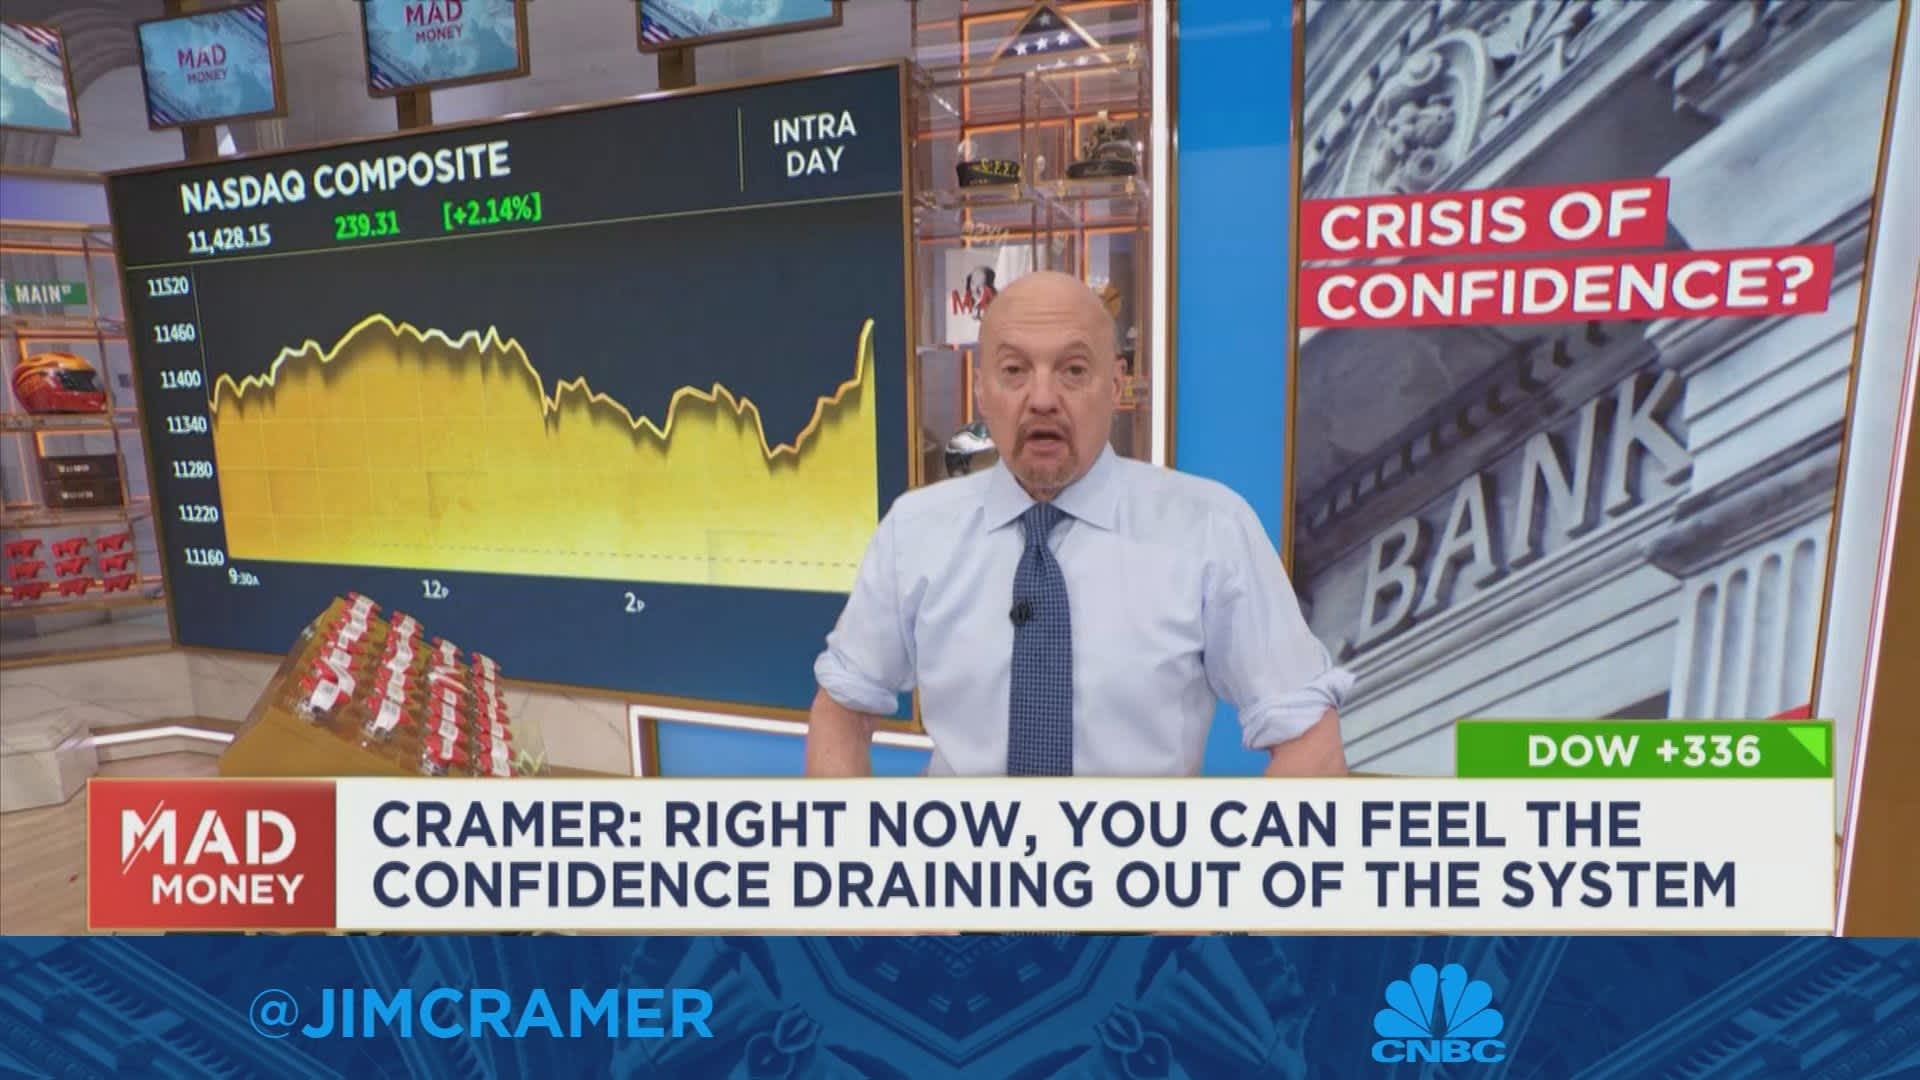 As long as the consumer is confident, I'm confident about business, says Cramer